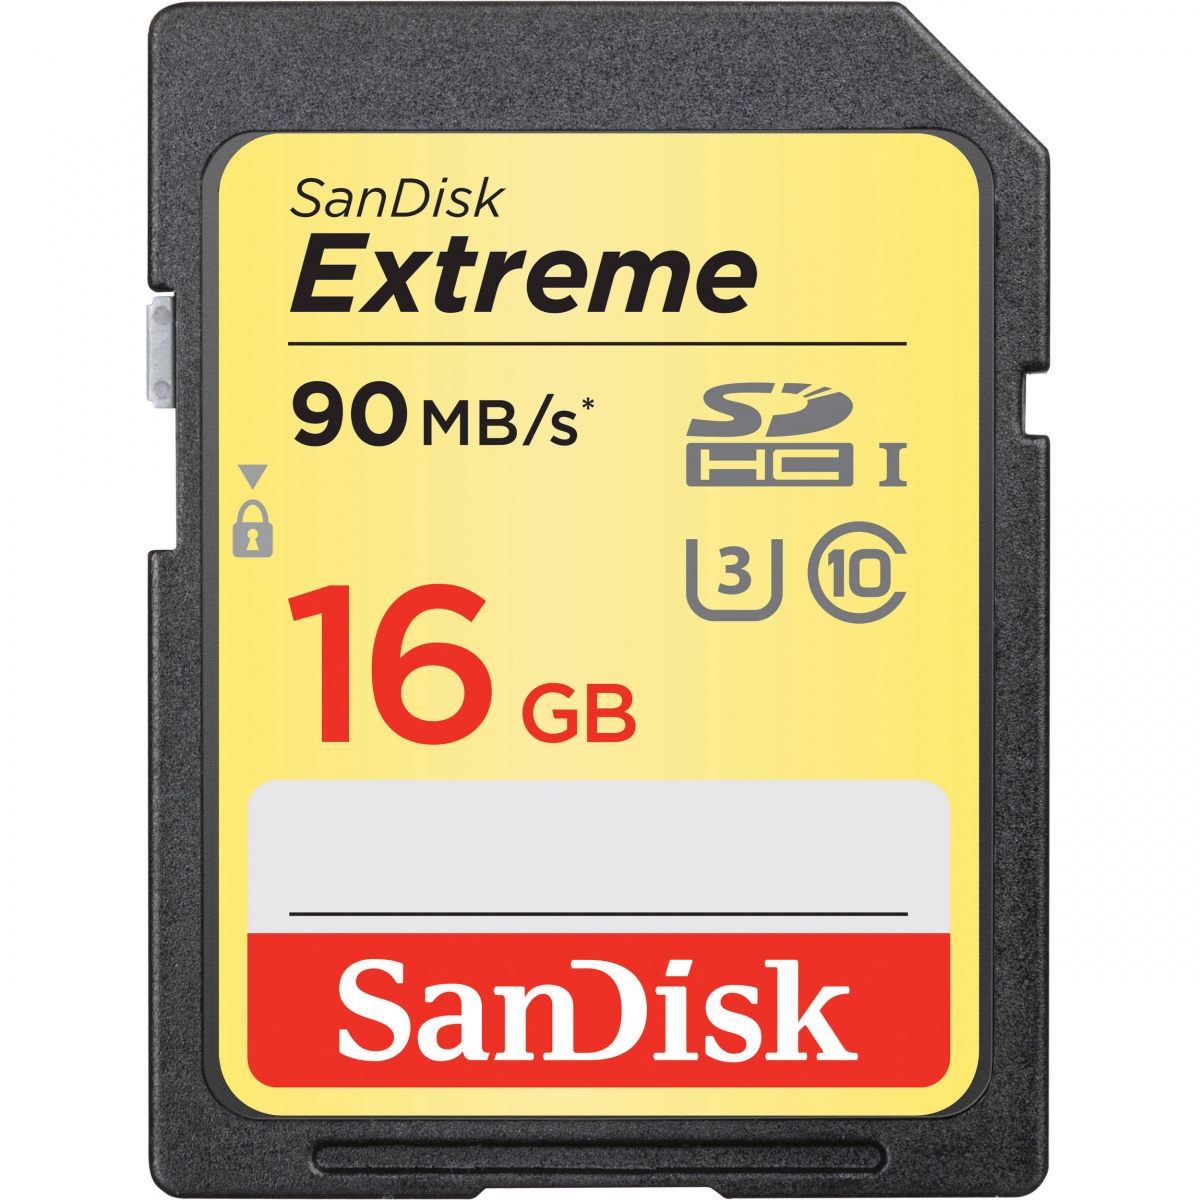 Sandisk Extreme SDHC 16 GB 90MB/s